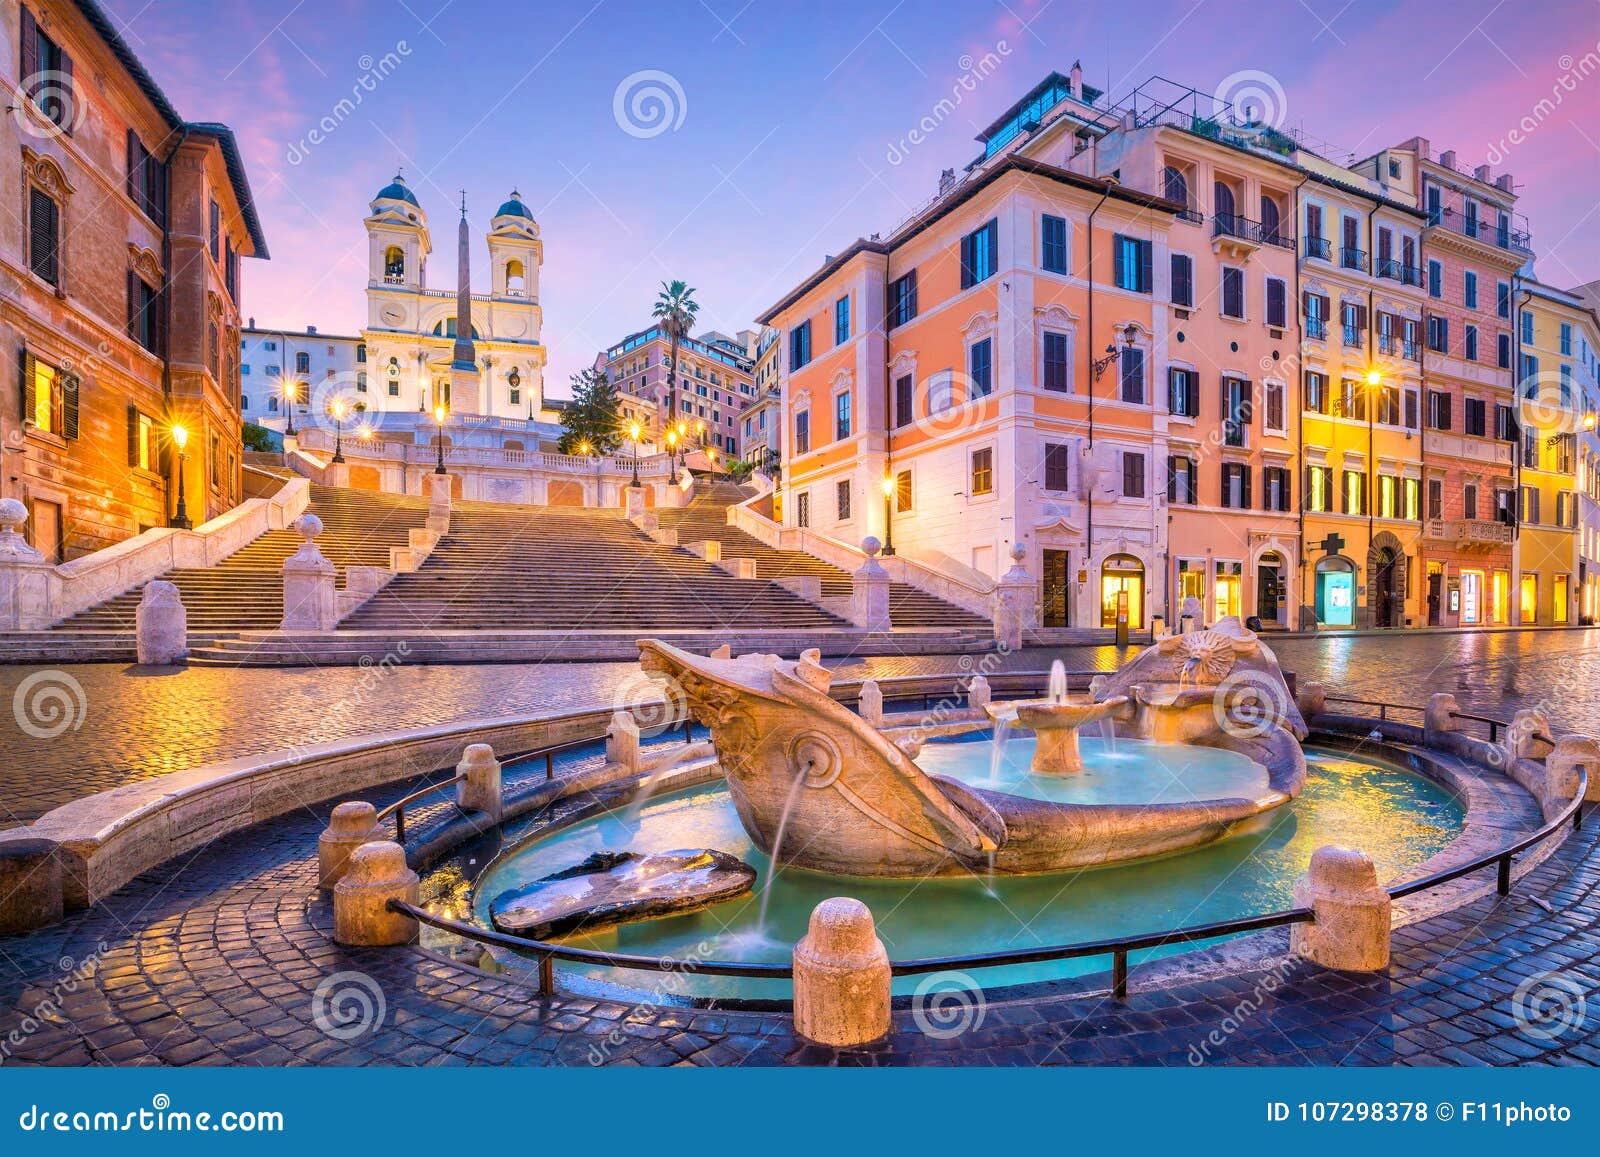 spanish steps in the morning, rome